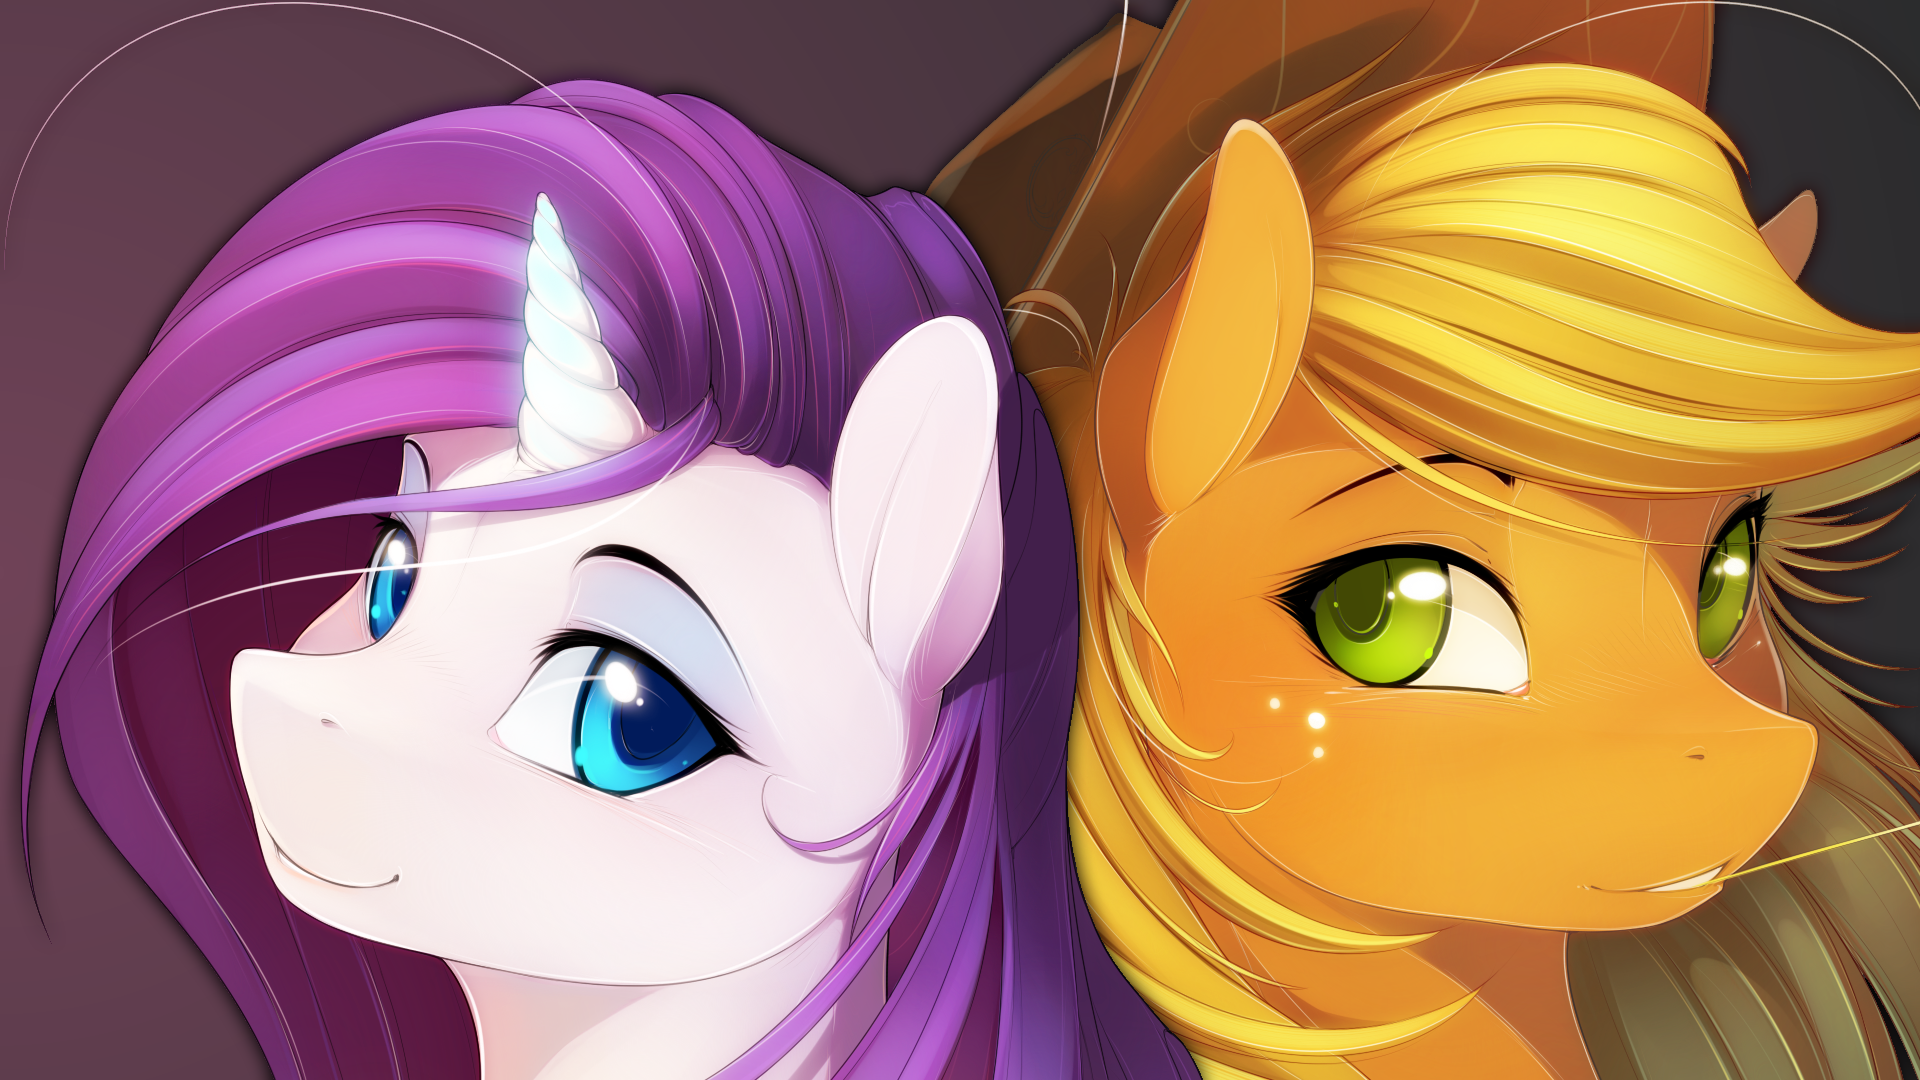 RariJack by AntiAnder and Shawnyall